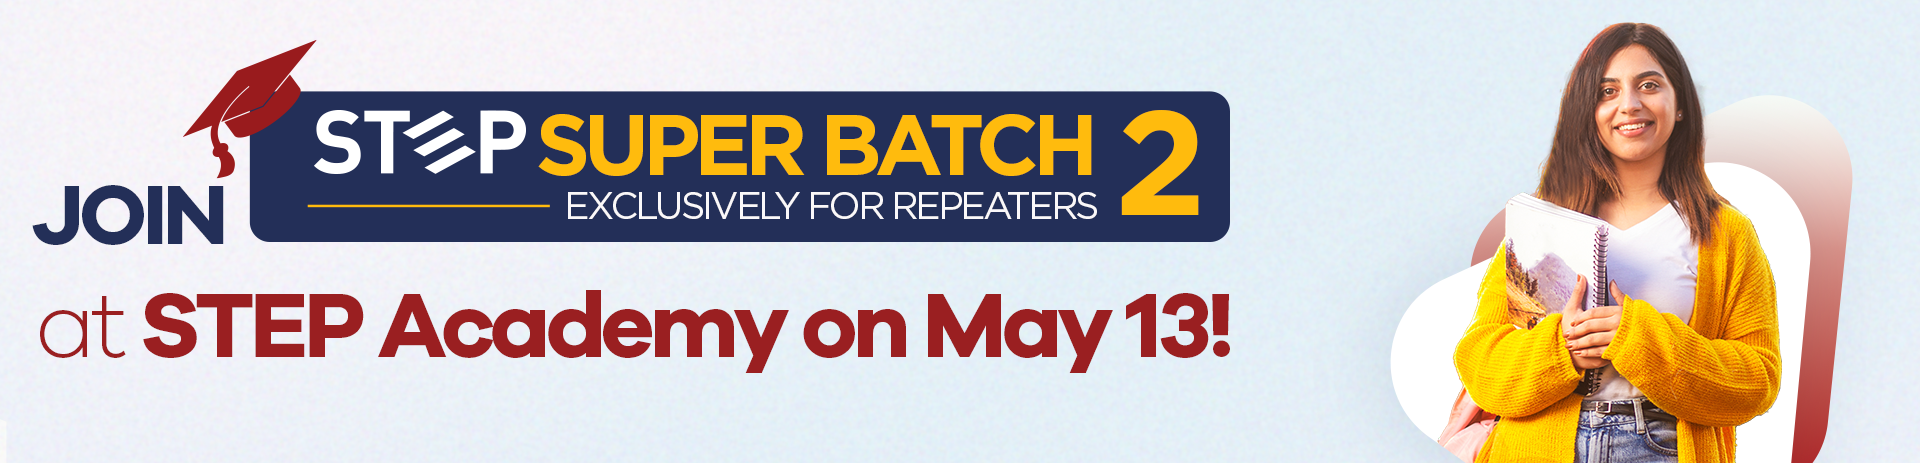 Join STEP Super Batch 2 at STEP Academy on May 13!